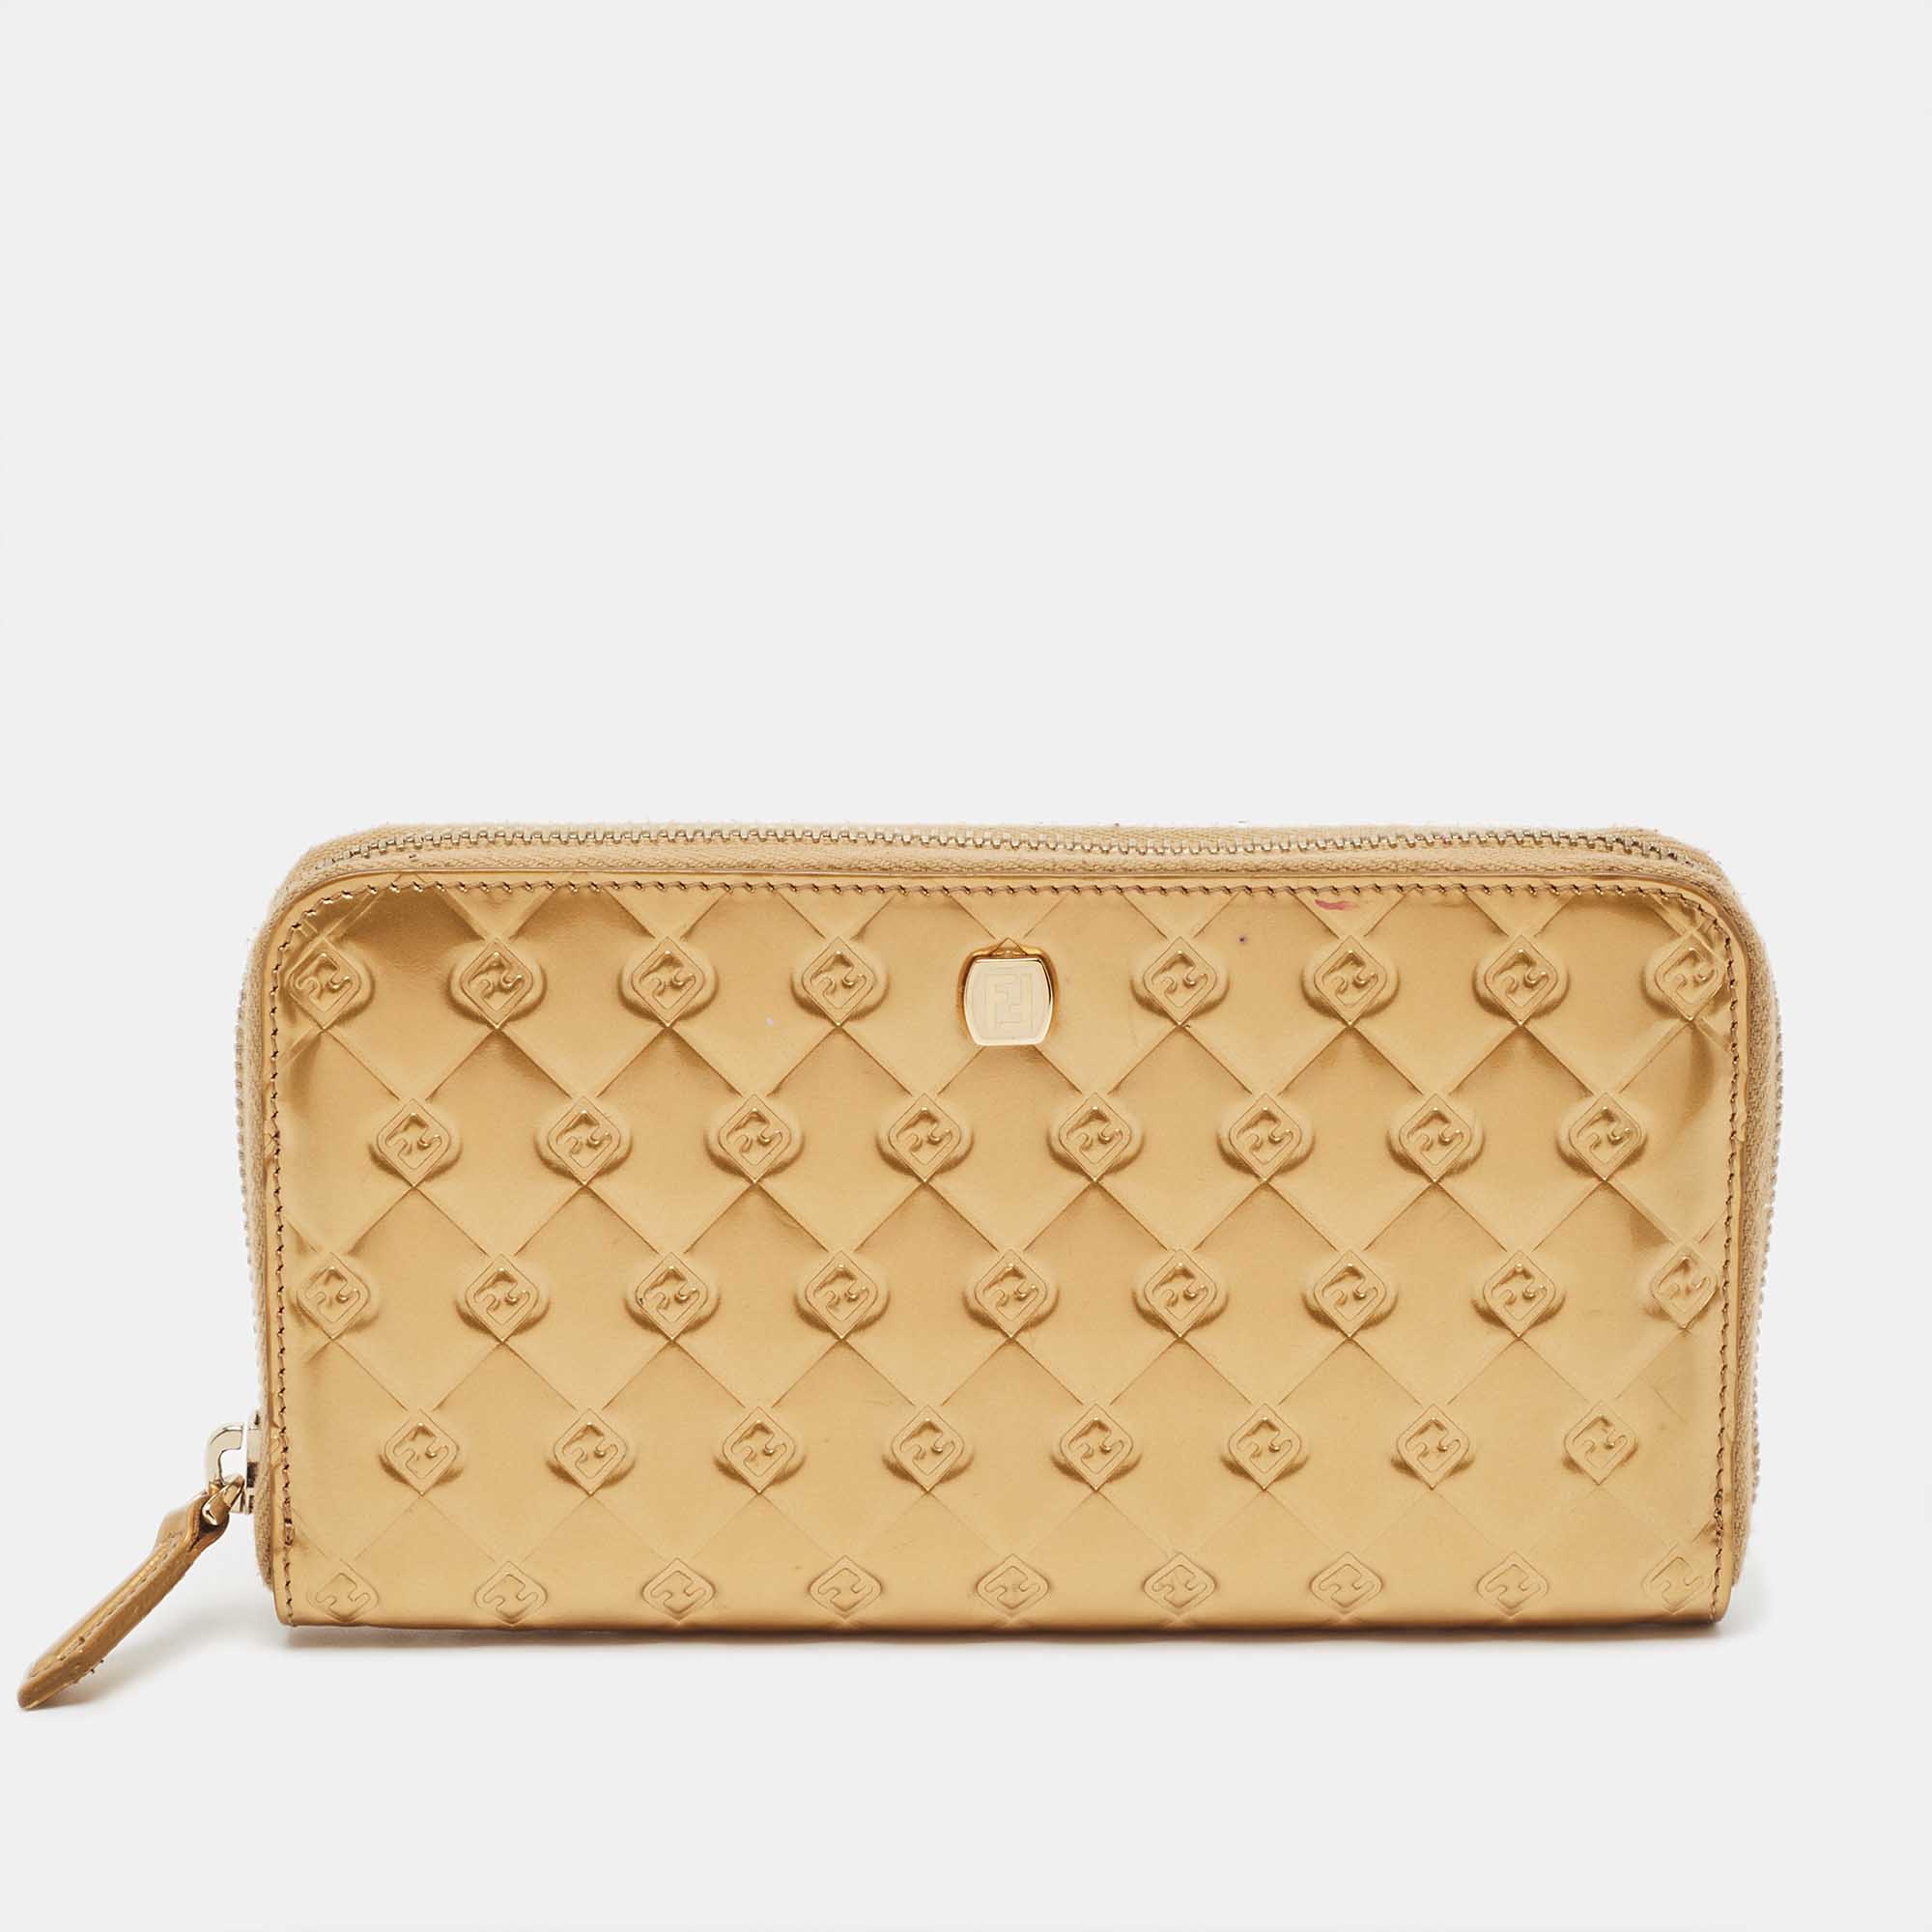 Fendi gold embossed patent leather fendilicious continental wallet